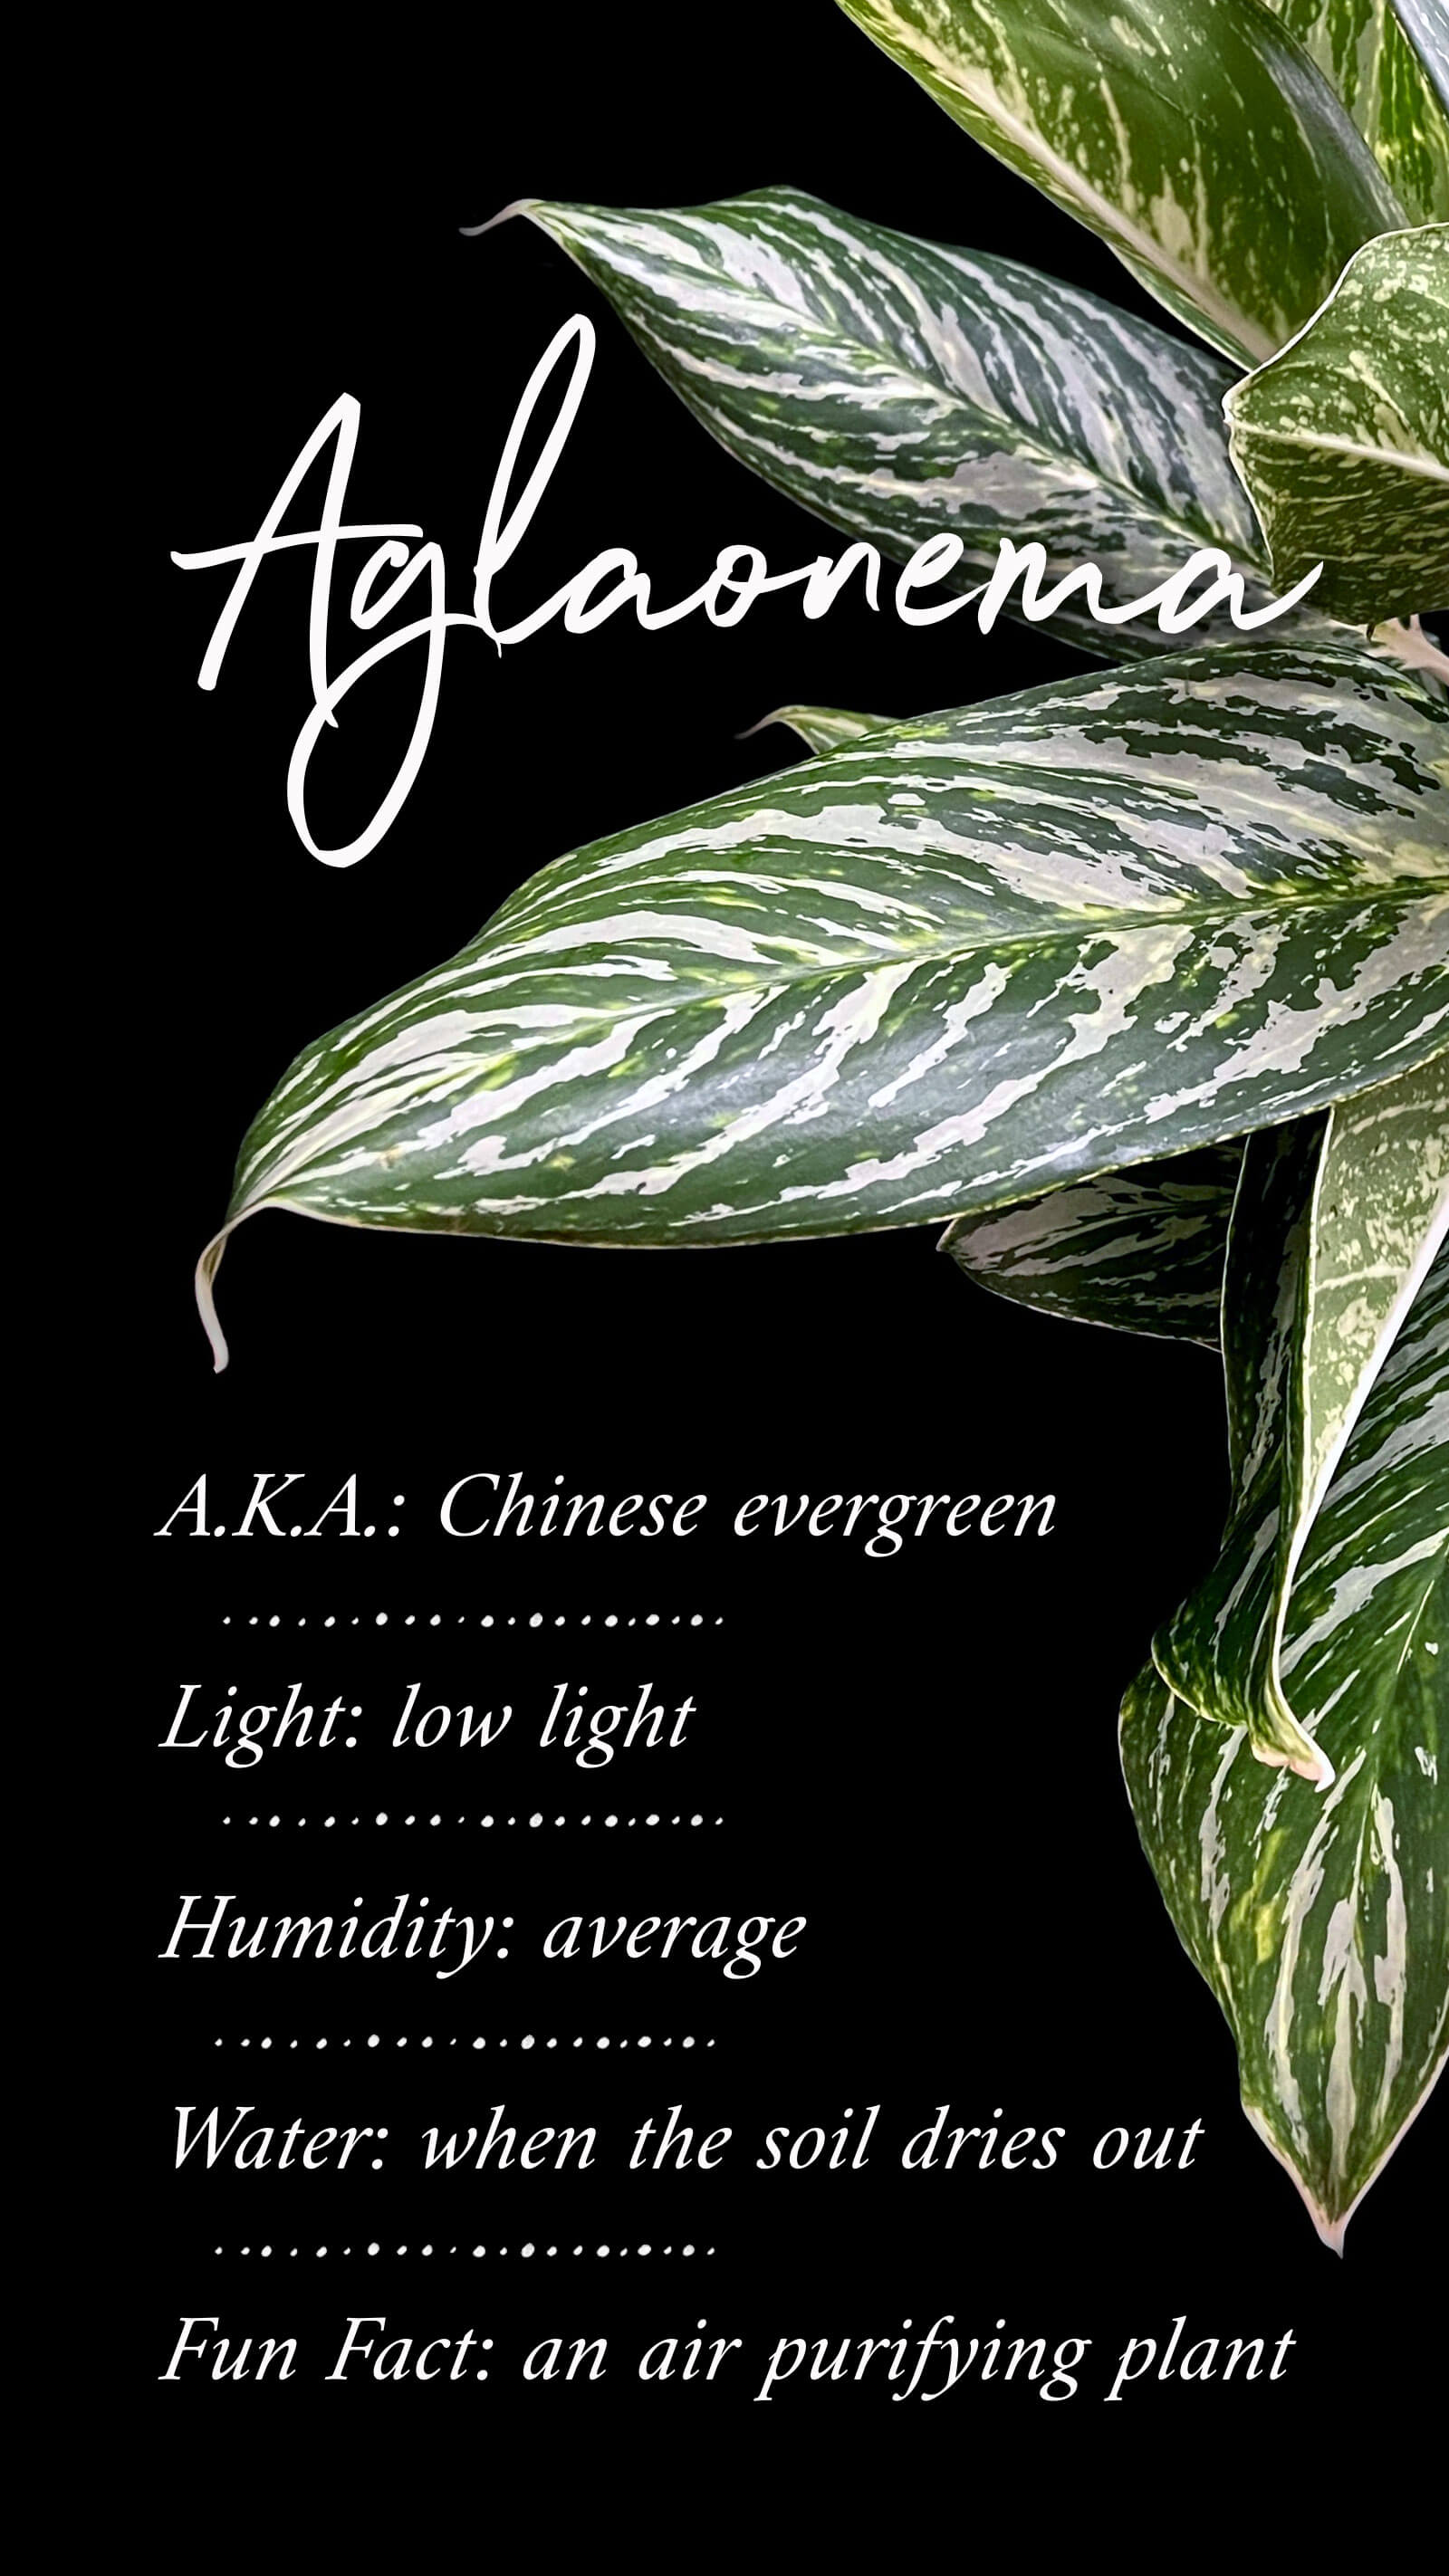 View of Aglaonema leaves. The leaves are vibrant and detailed, with a mix of green and creamy white colors creating intricate patterns. Order online for plants & flowers from the best florist in Toronto near you.